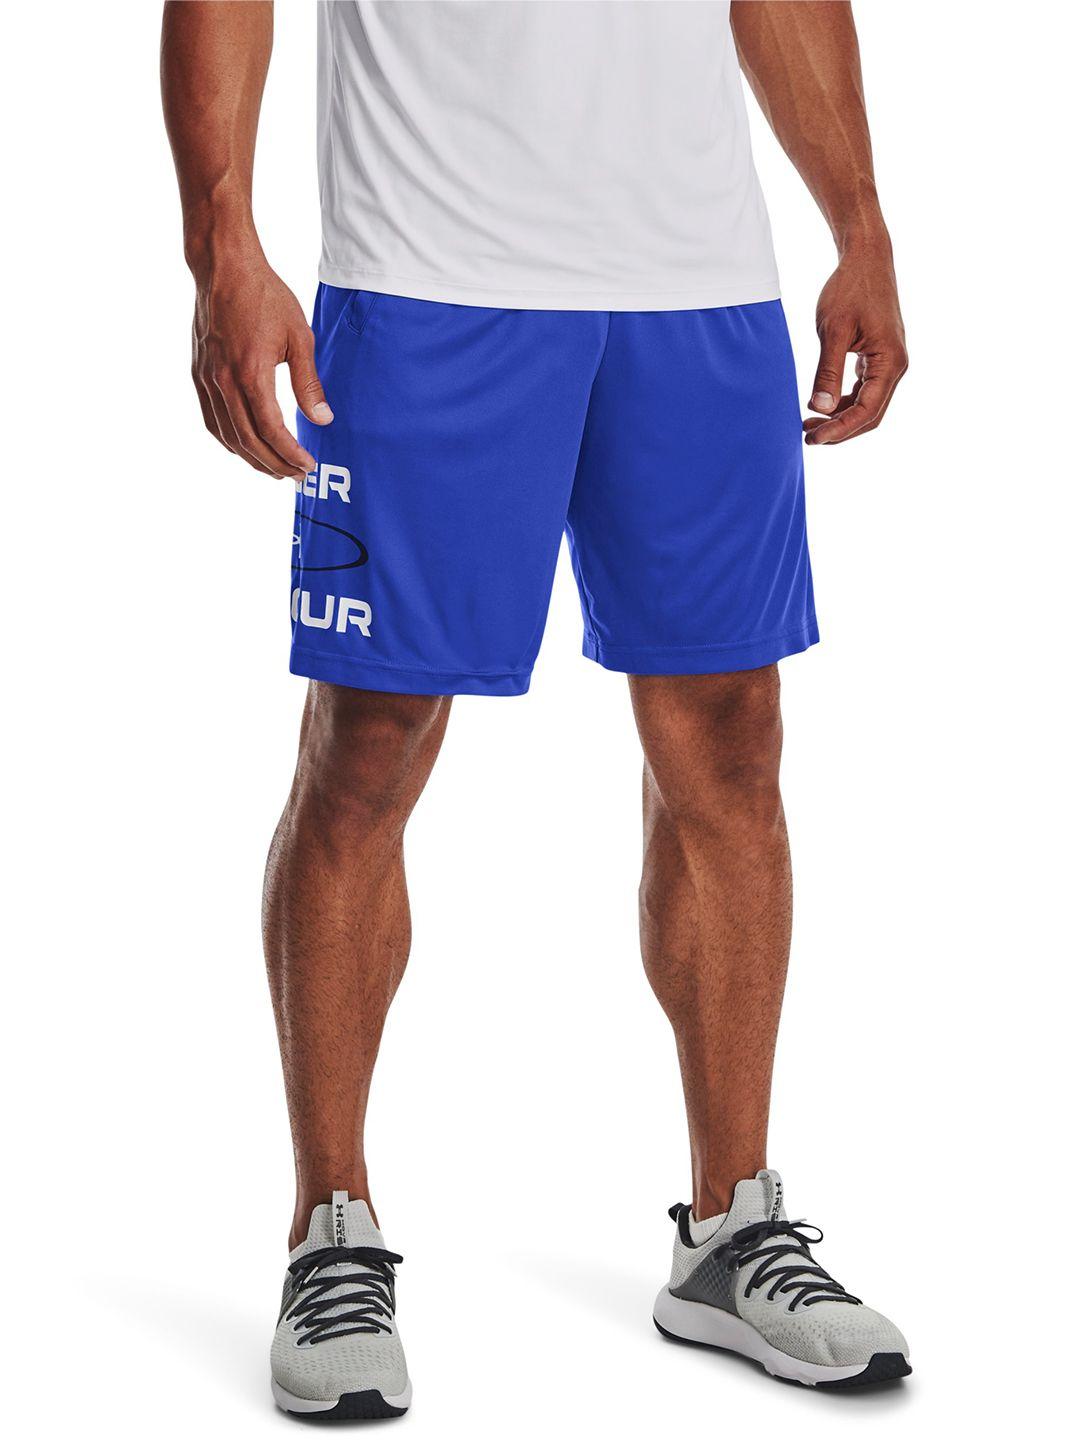 under-armour-men-typography-printed-loose-fit-low-rise-training-sports-shorts